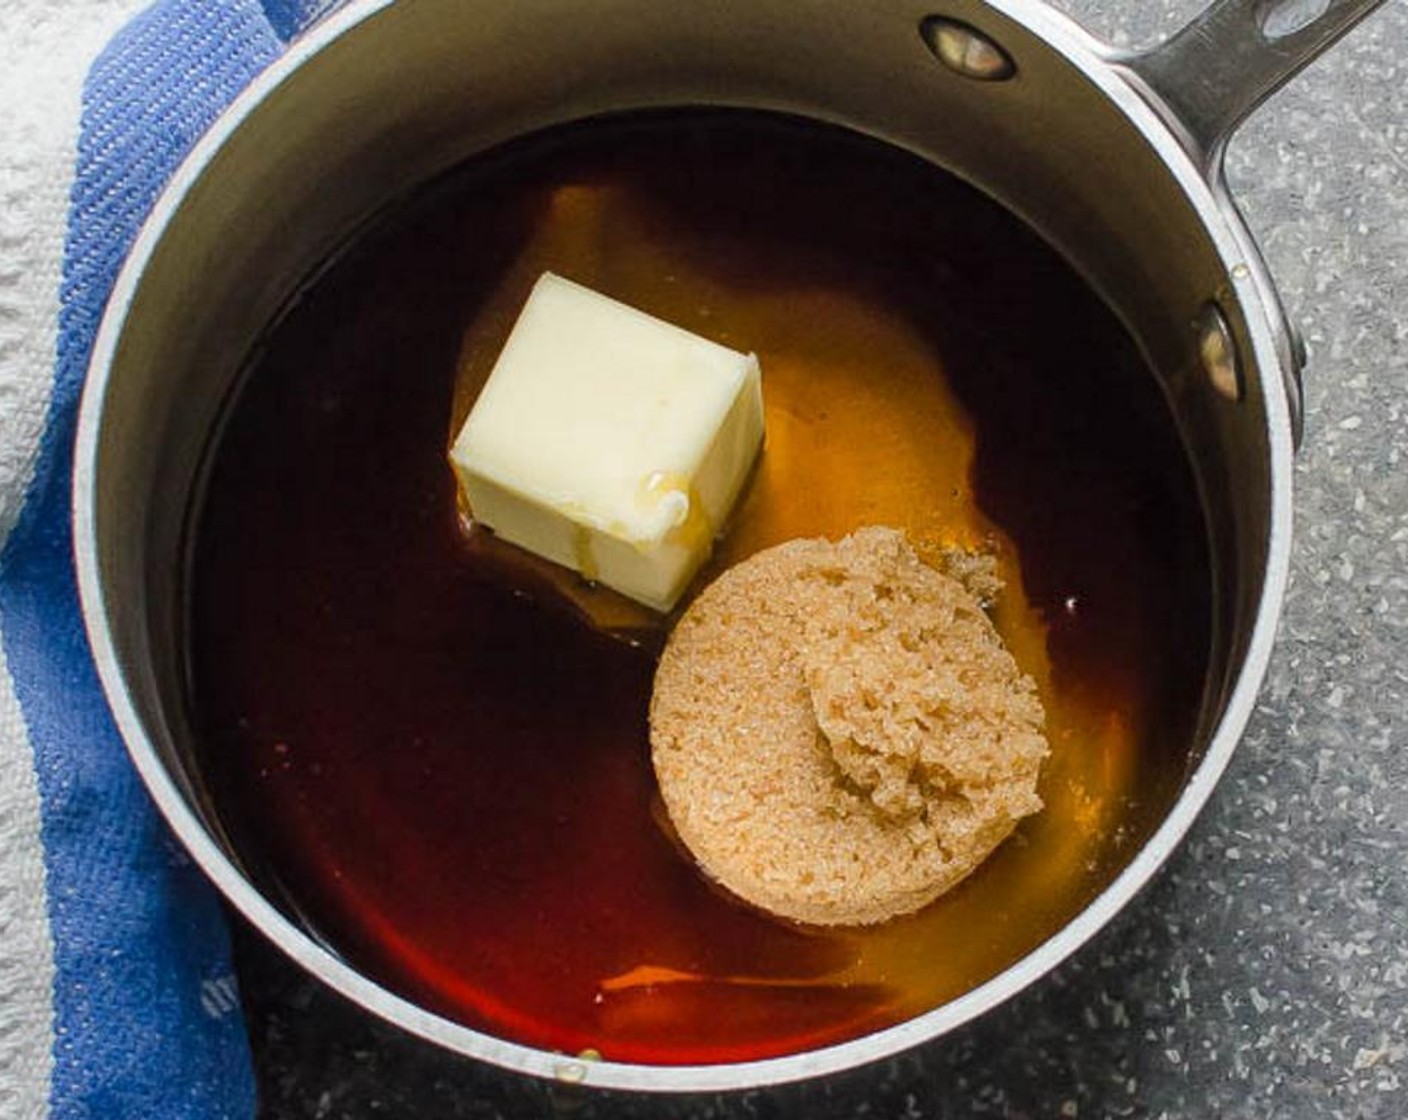 step 5 In a small saucepan over medium heat combine the Butter (3 Tbsp), Honey (1/2 cup) and Brown Sugar (1/4 cup), stirring constantly until the butter has melted and the sugar has dissolved. Stir in the Vanilla Extract (1 tsp) and the spice mixture and set aside.